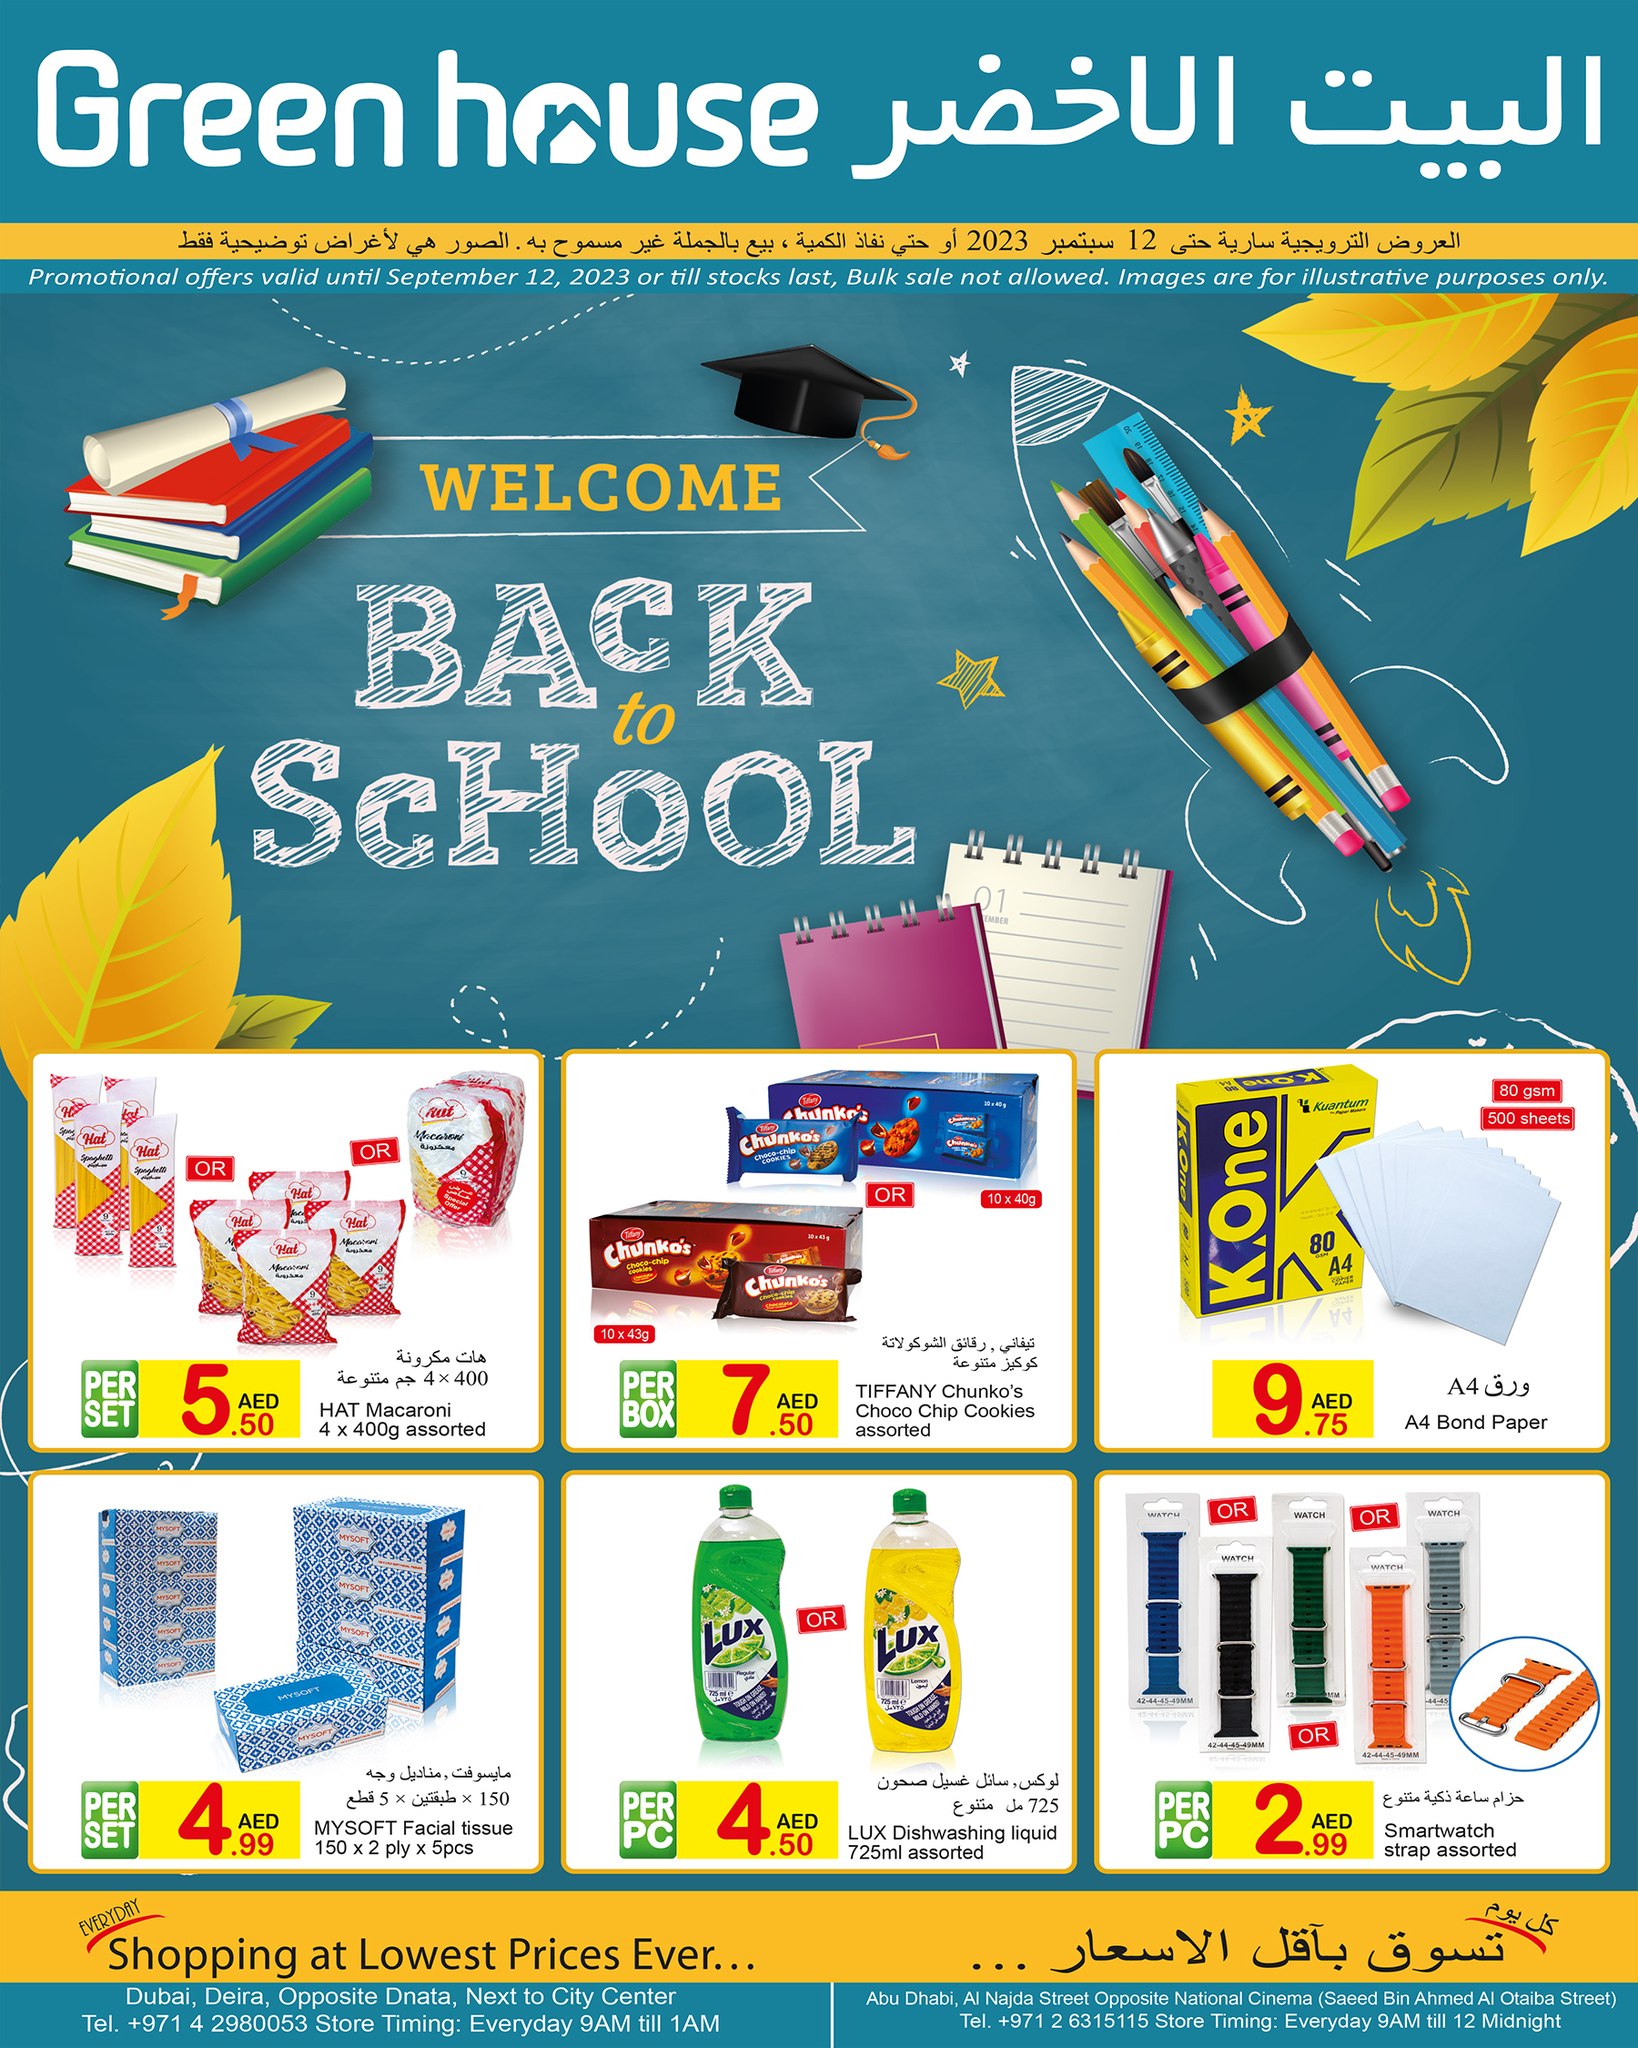 GREEN HOUSE OFFERS CATALOGUE BACK TO SCHOOL DEALS